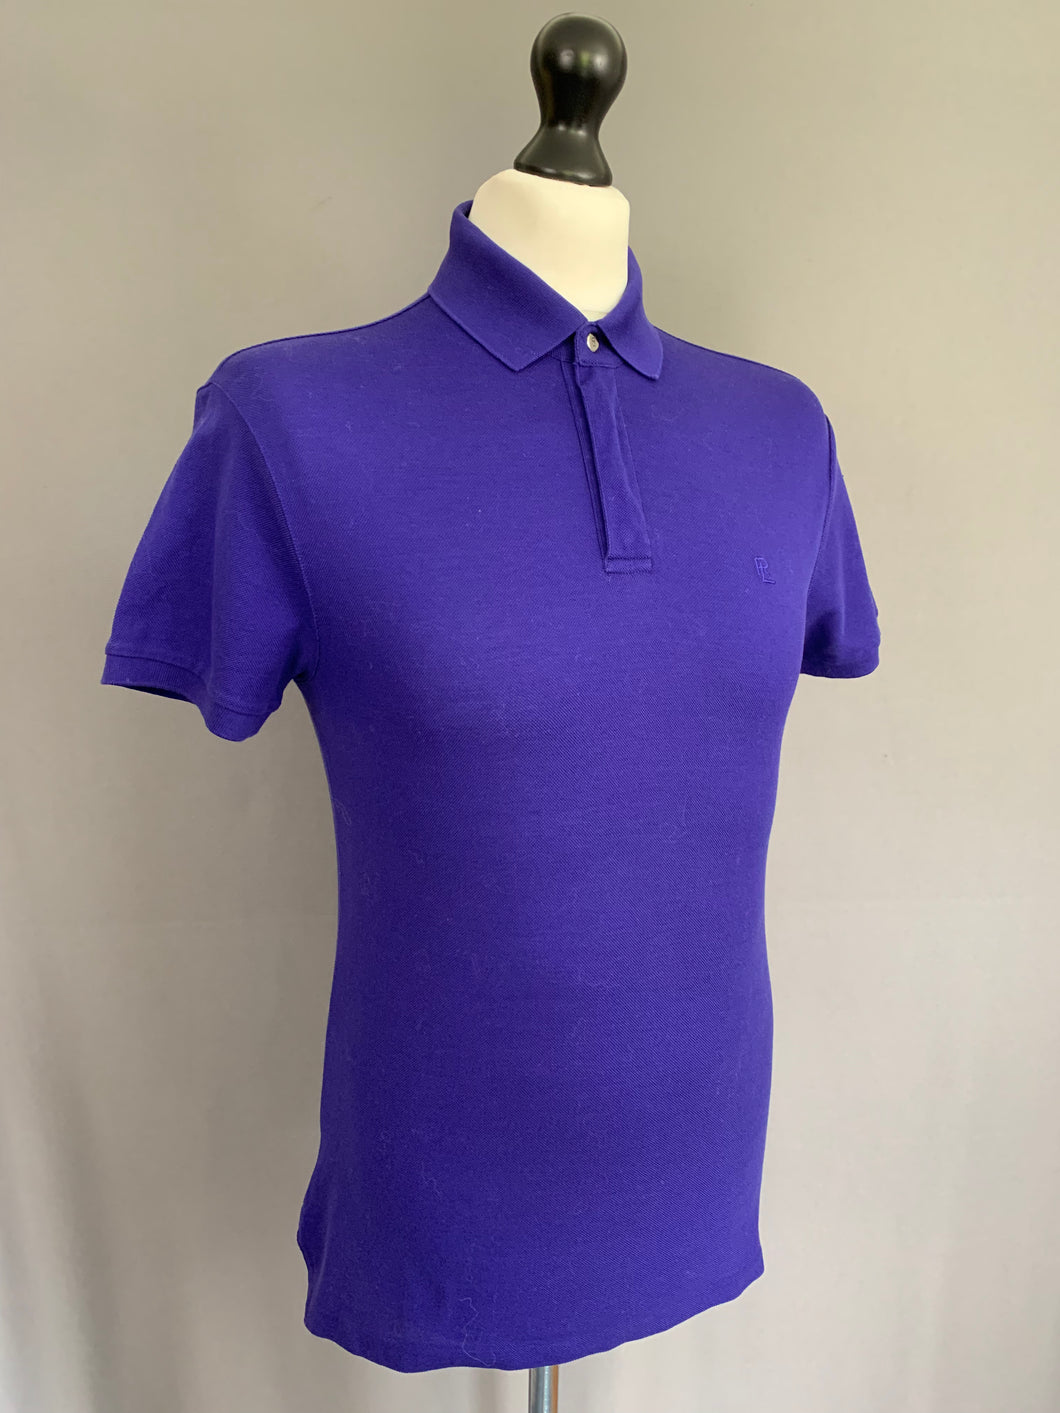 RALPH LAUREN POLO SHIRT - PURPLE LABEL - Size Small S - Made in Italy –  